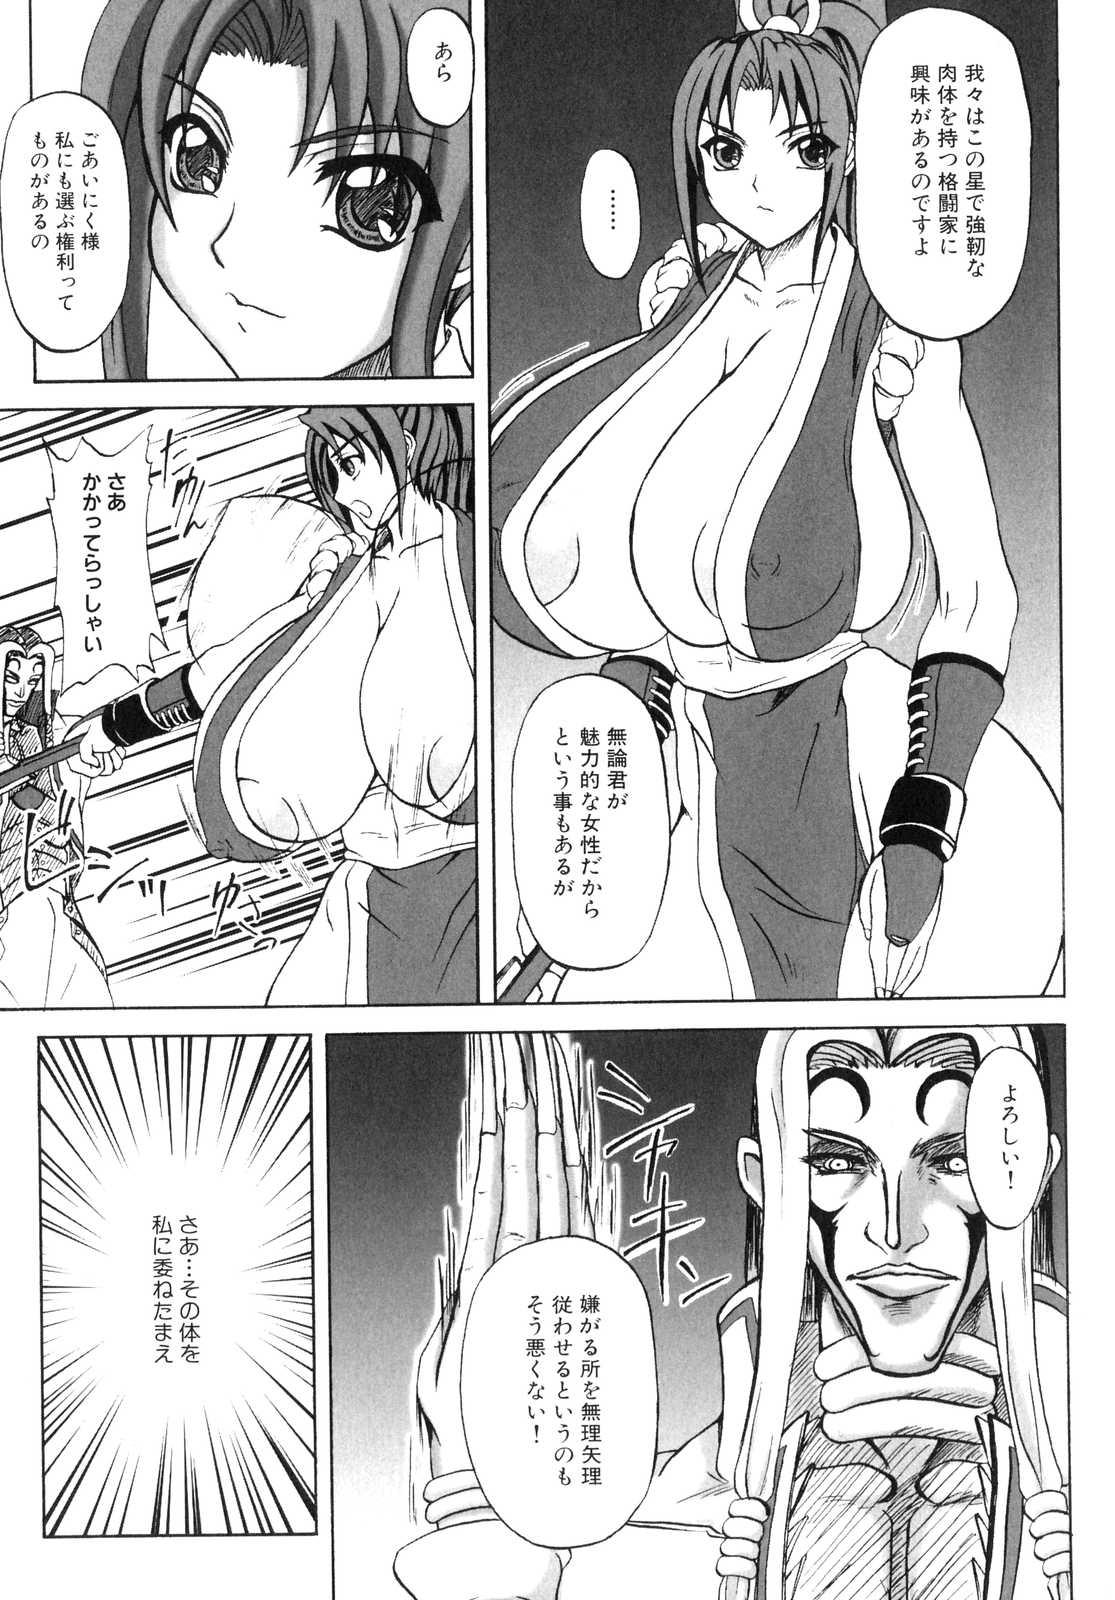 Gay Cash Mars Impact - King of fighters Vagina - Page 4